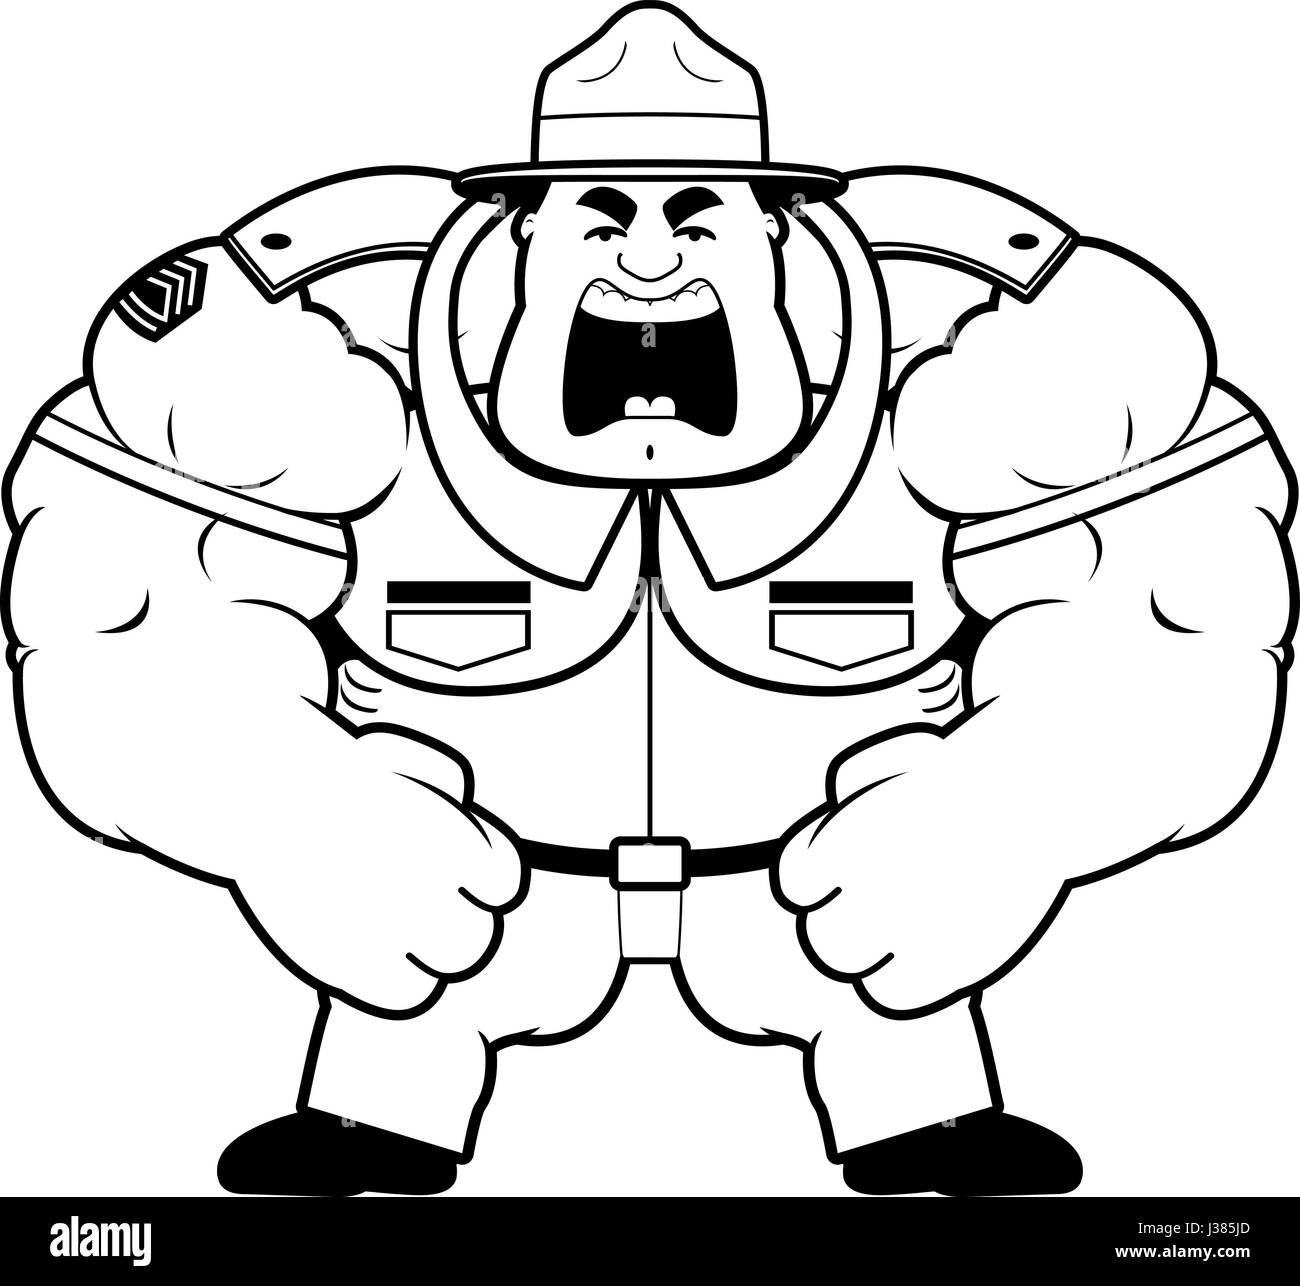 A cartoon illustration of a muscular drill sergeant yelling. Stock Vector